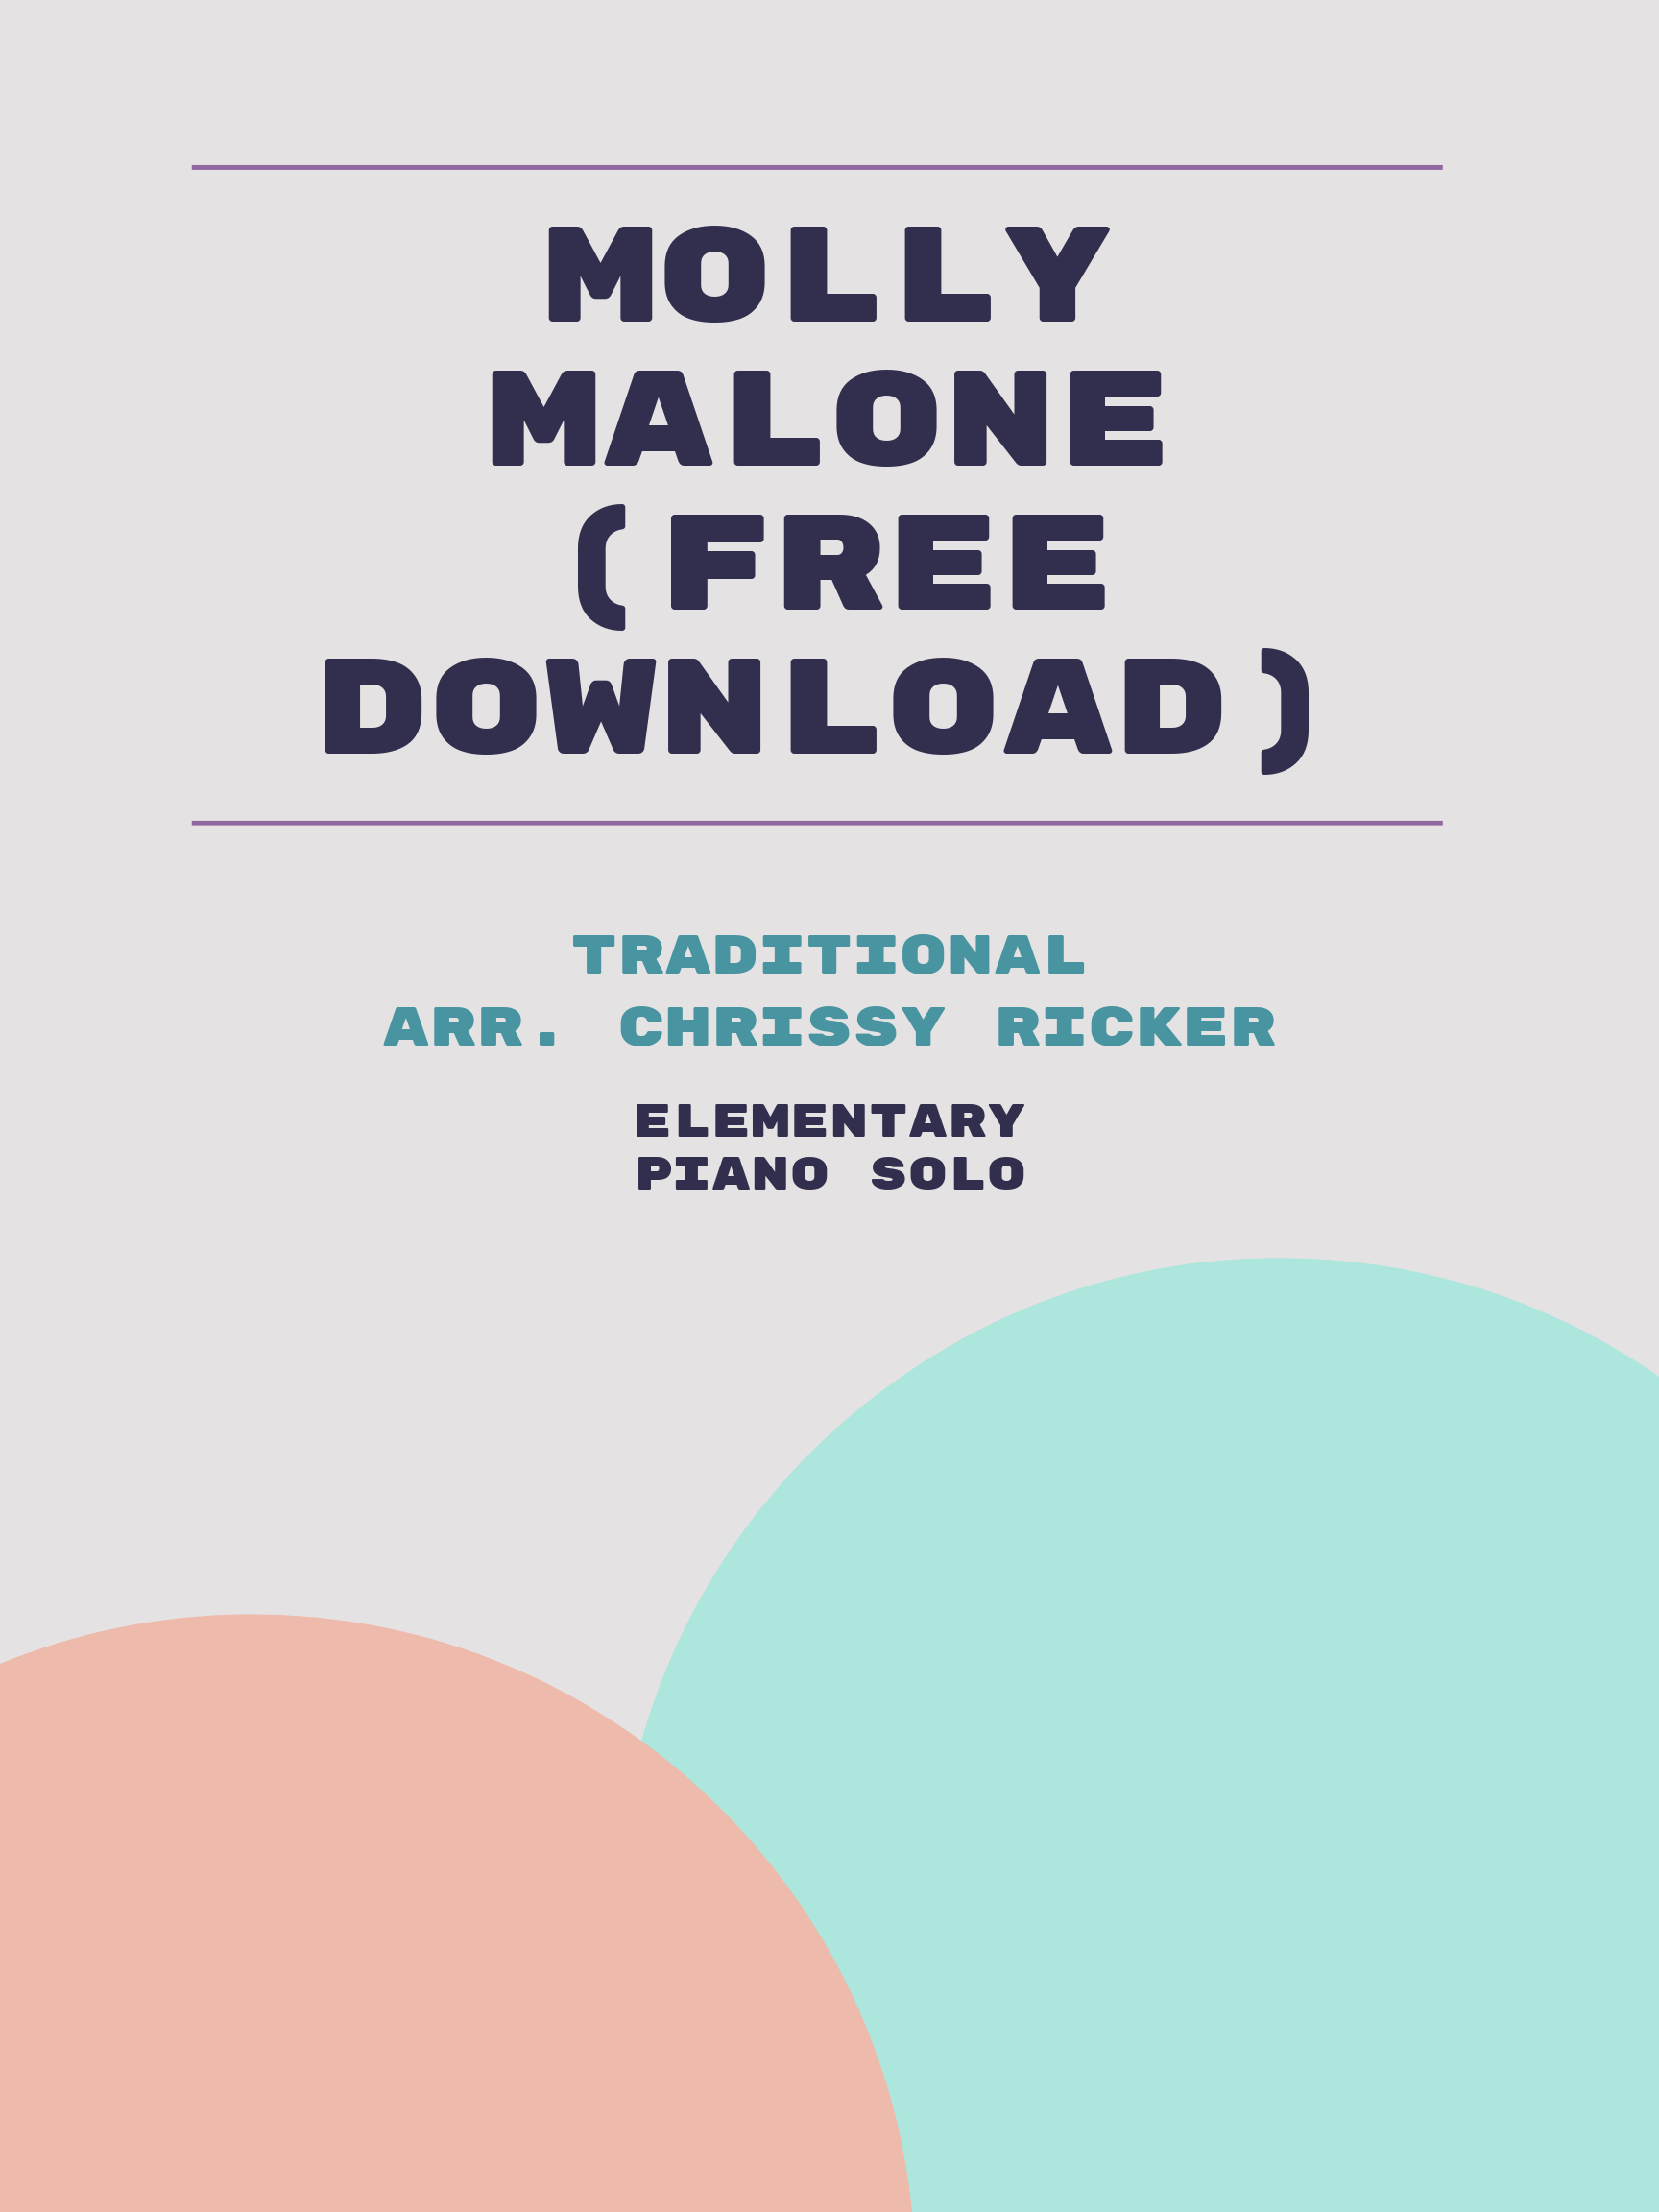 Molly Malone (free download) by Traditional